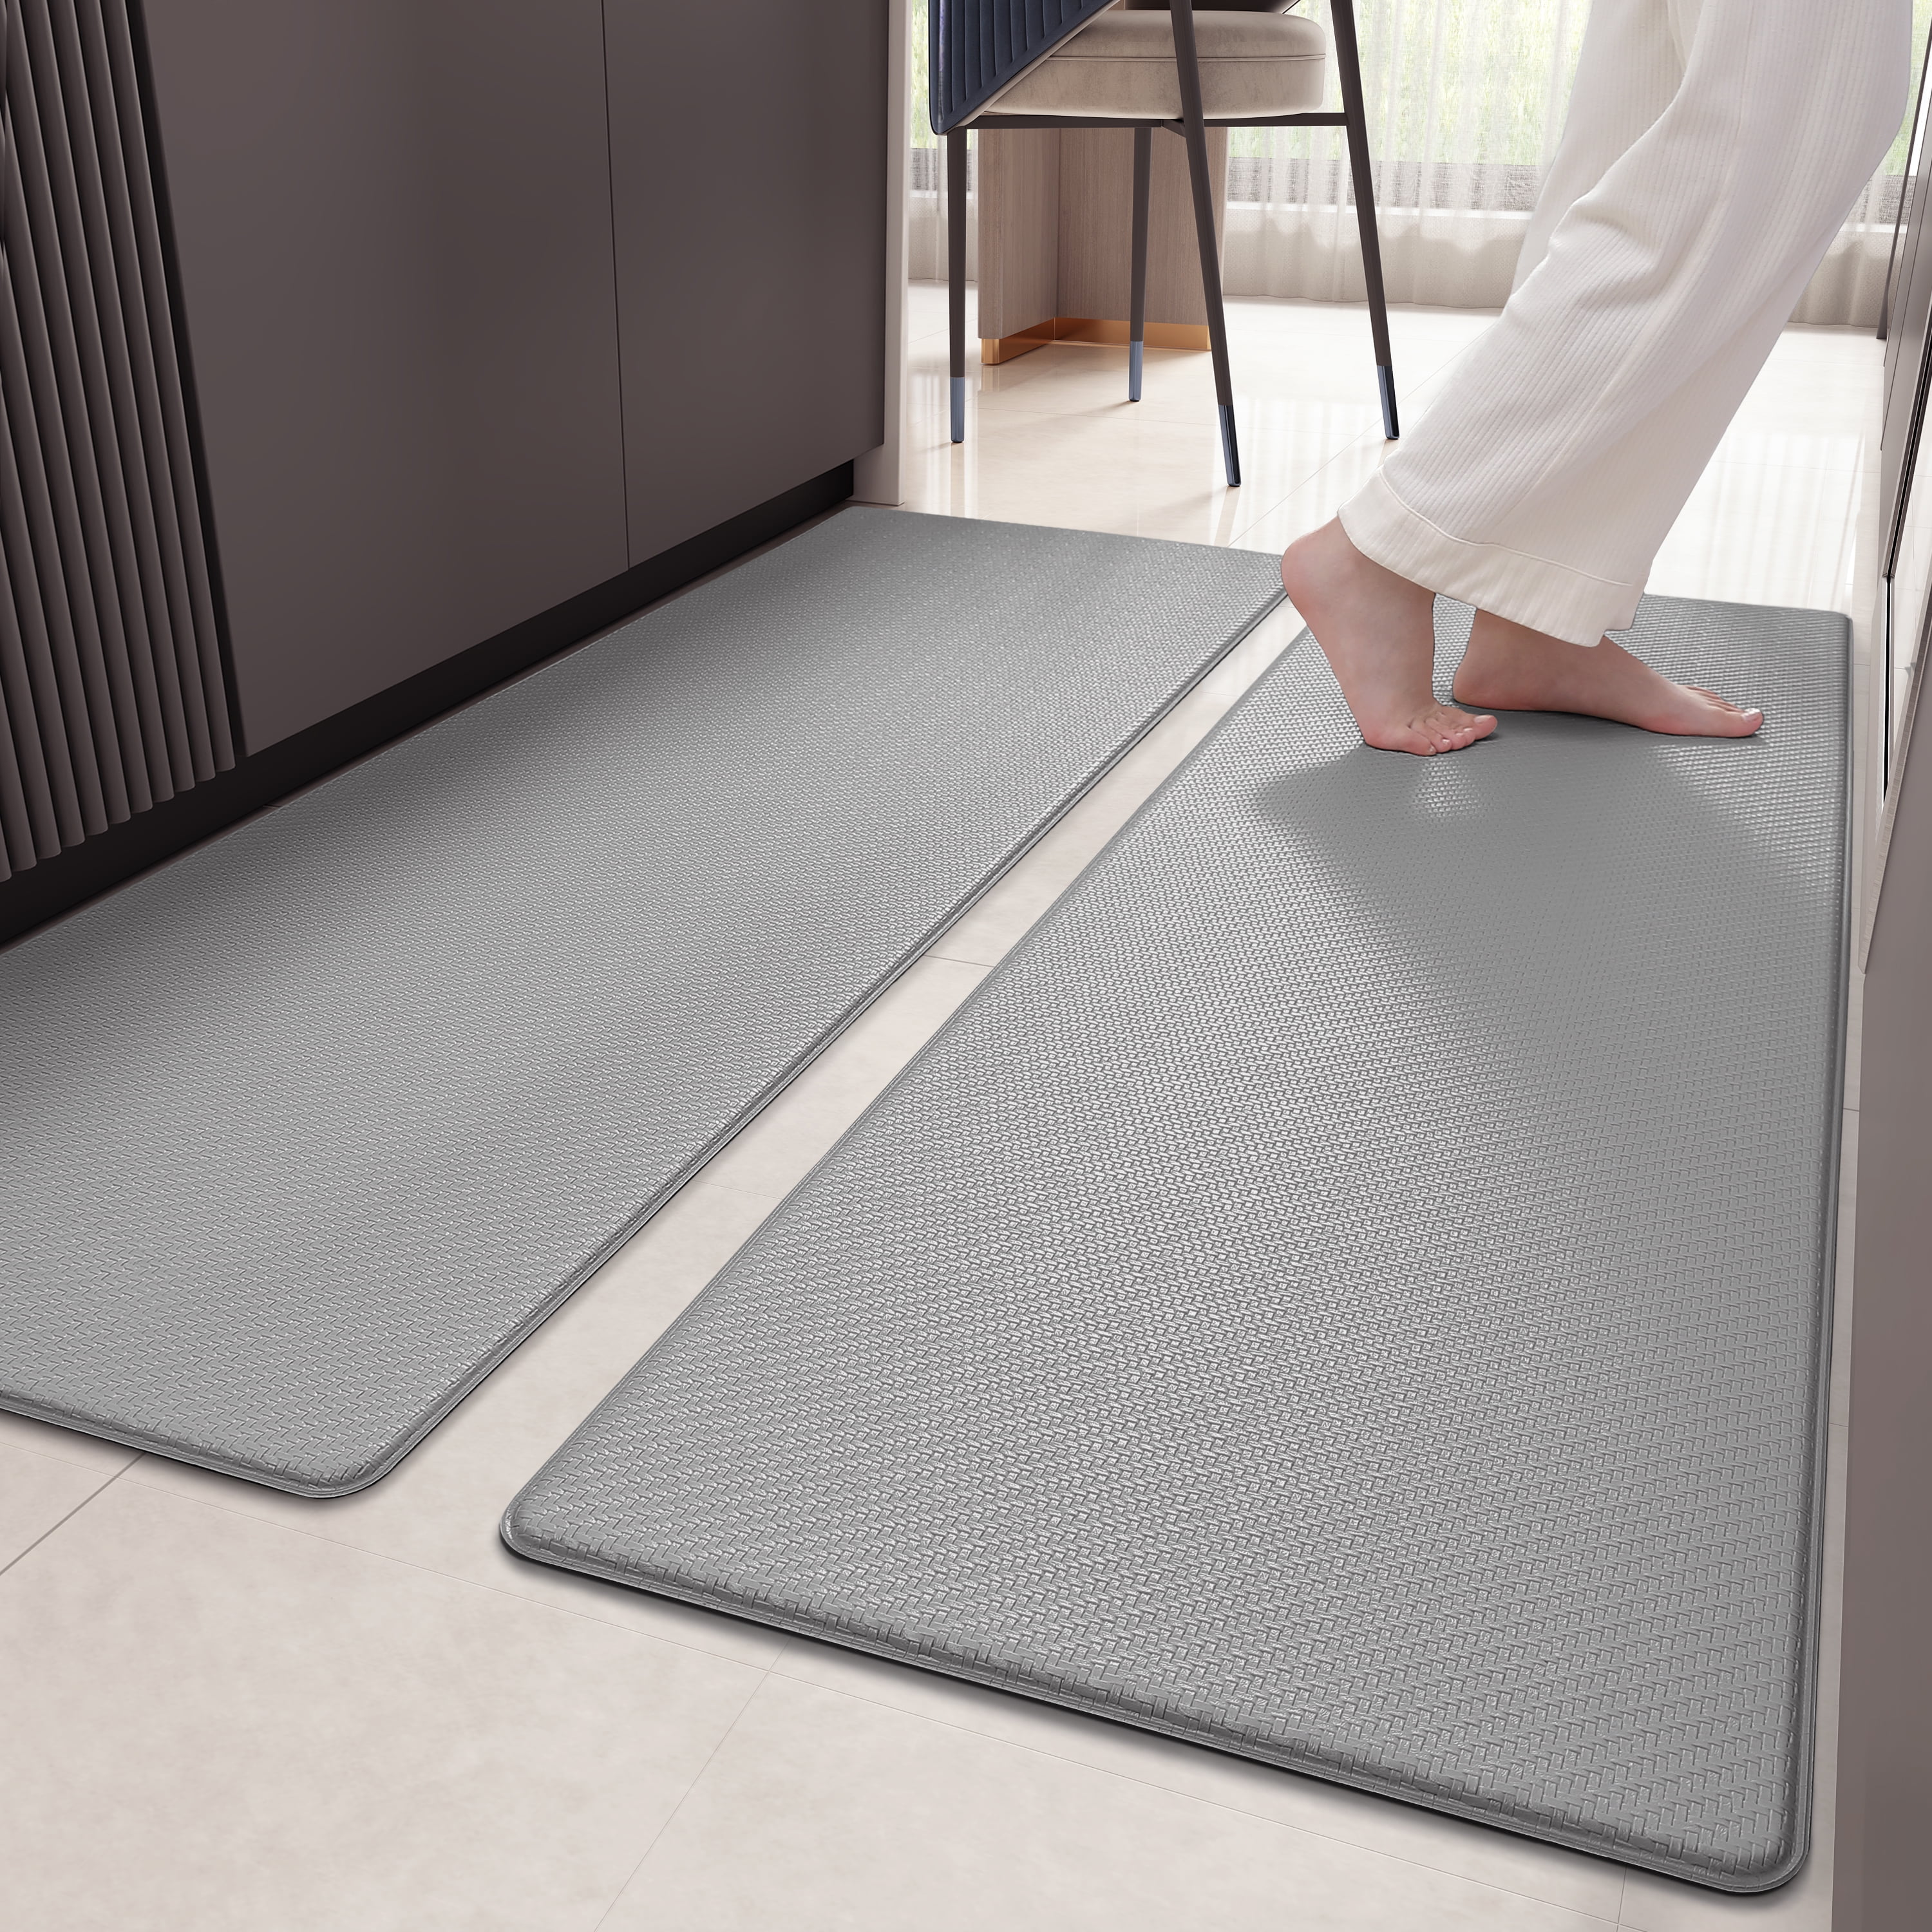 Rempry Kitchen Rugs and Mats Set of 2, Cushioned Anti Fatigue Kitchen Floor  Mat, Non Slip Waterproof Kitchen Rug Set Comfort Standing Mats 17